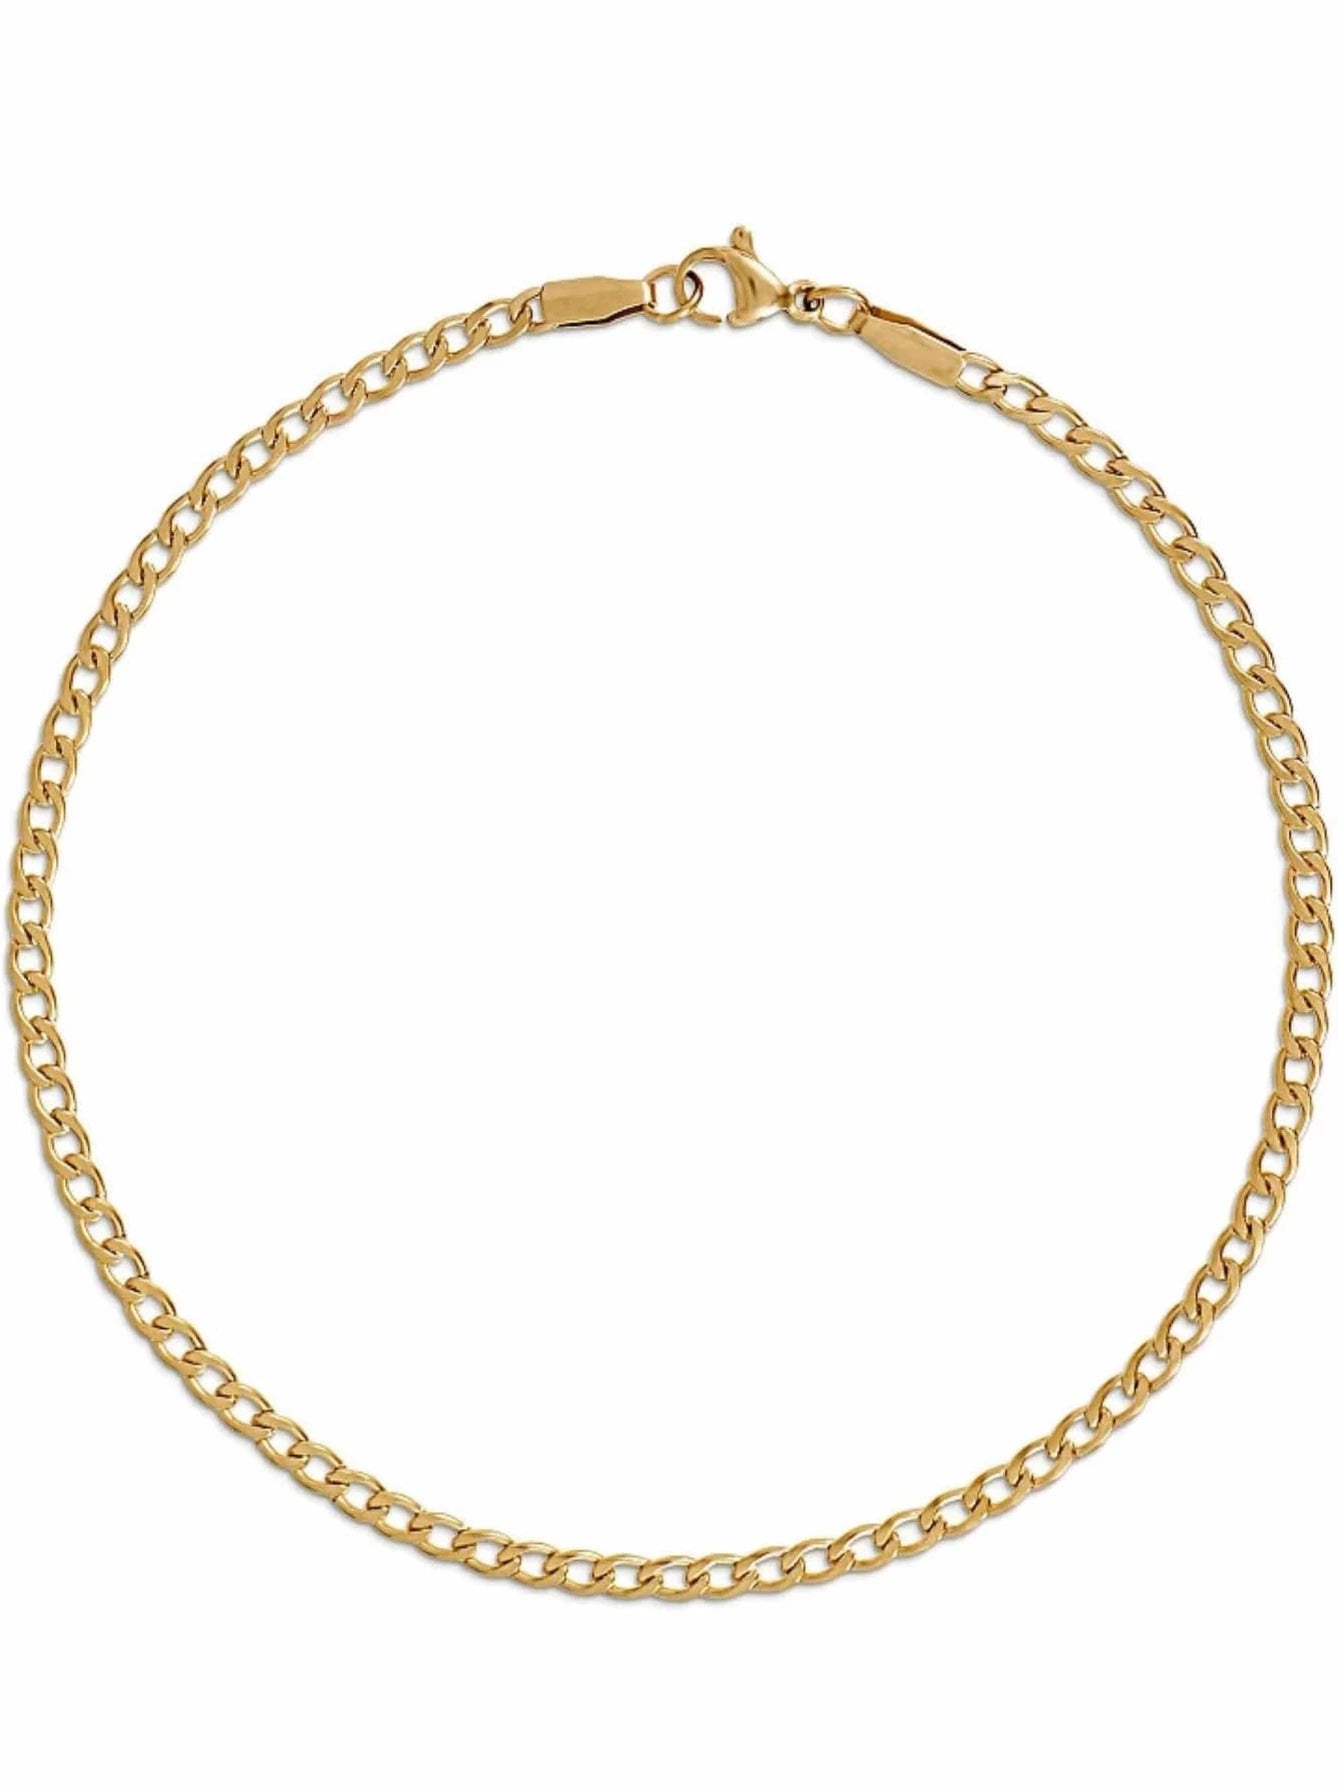 Ellie Vail earrings Nyx Curb Chain // ANKLET